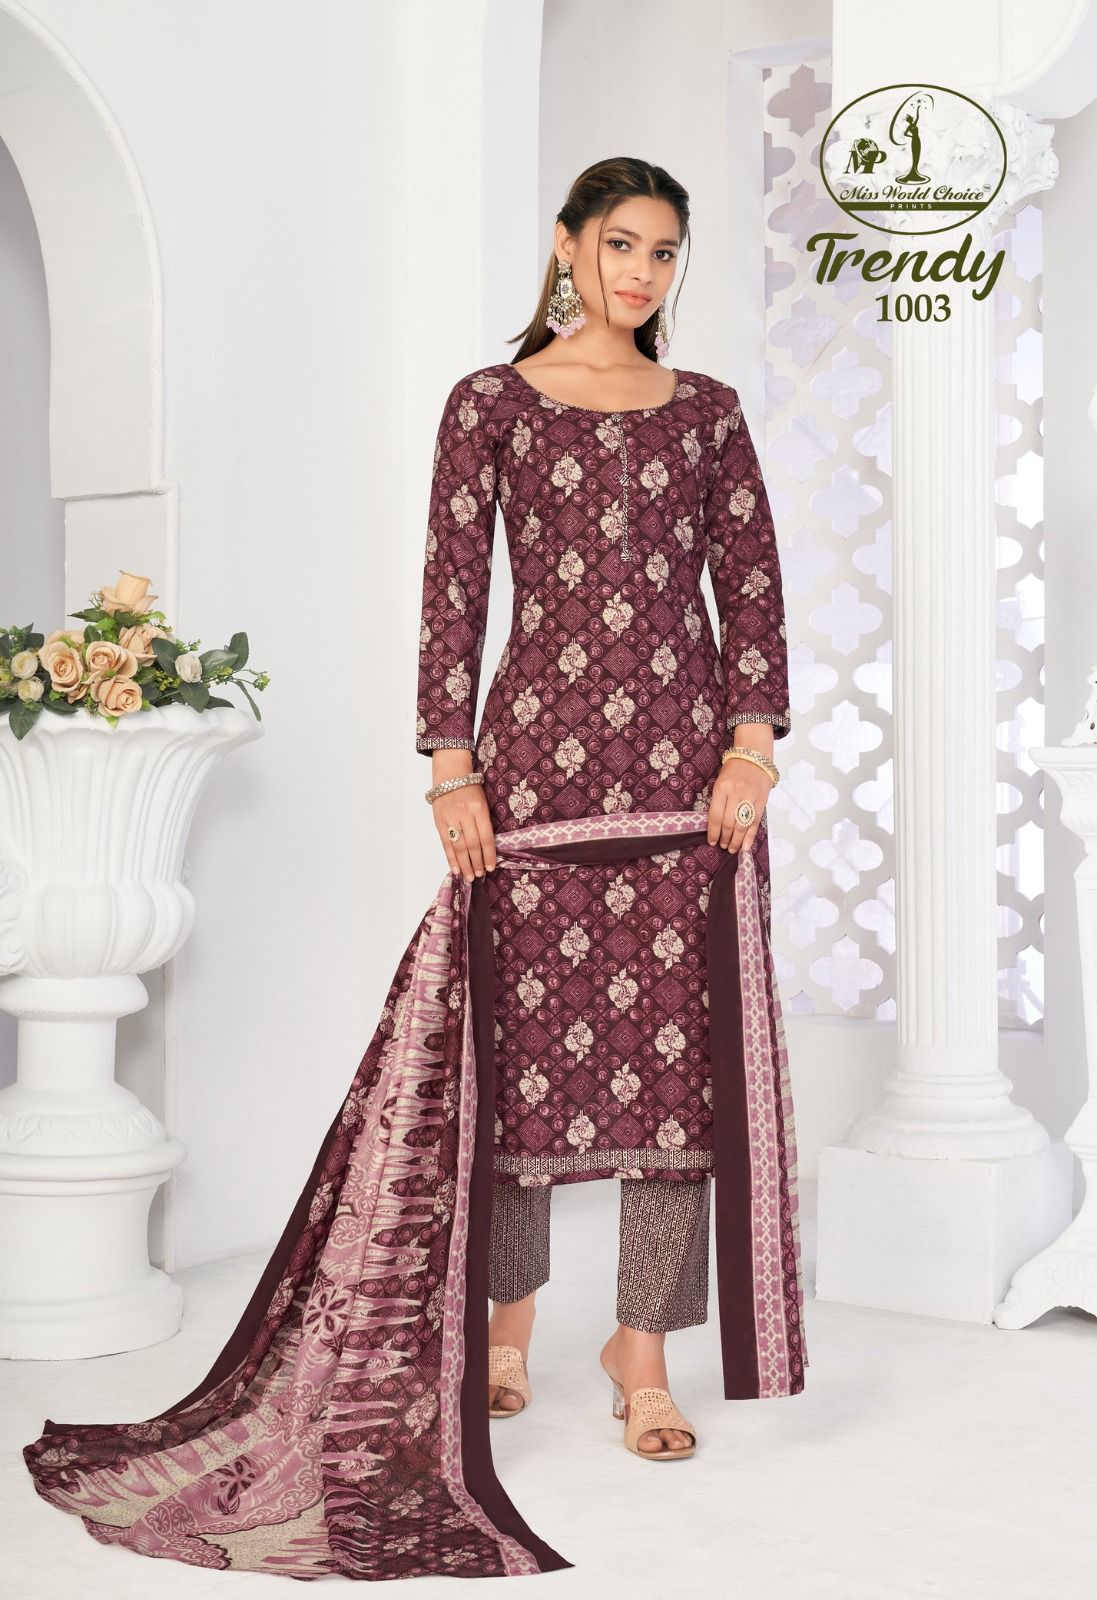 Trendy Vol 1 Miss World Choice Cotton Dress Material Supplier Ahmedabad